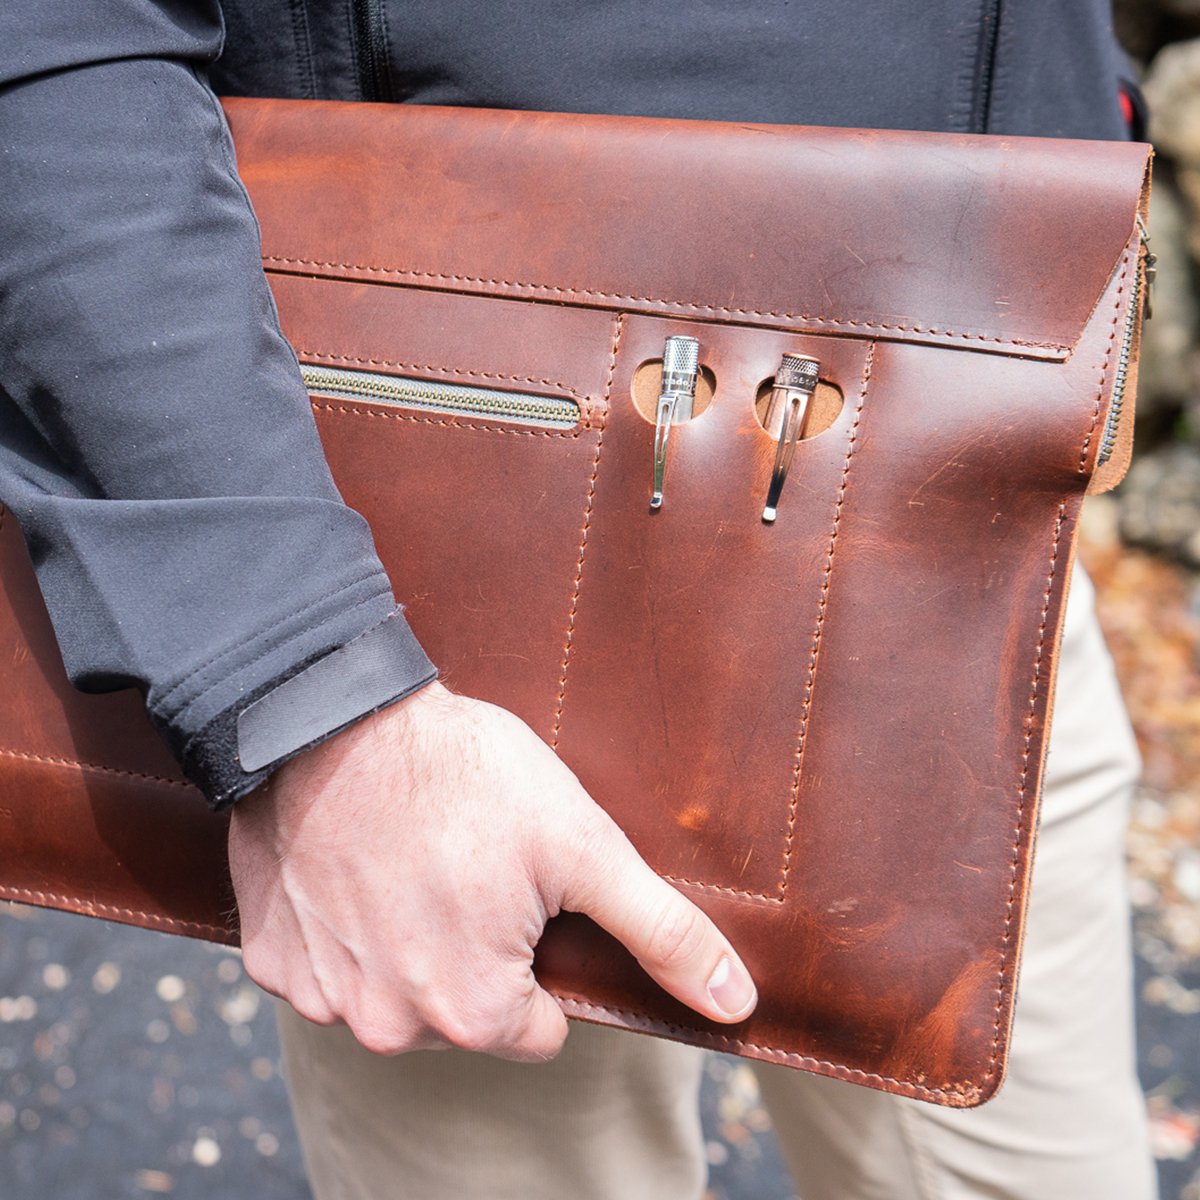 Laptop Bags for Men, Leather Laptop Bags